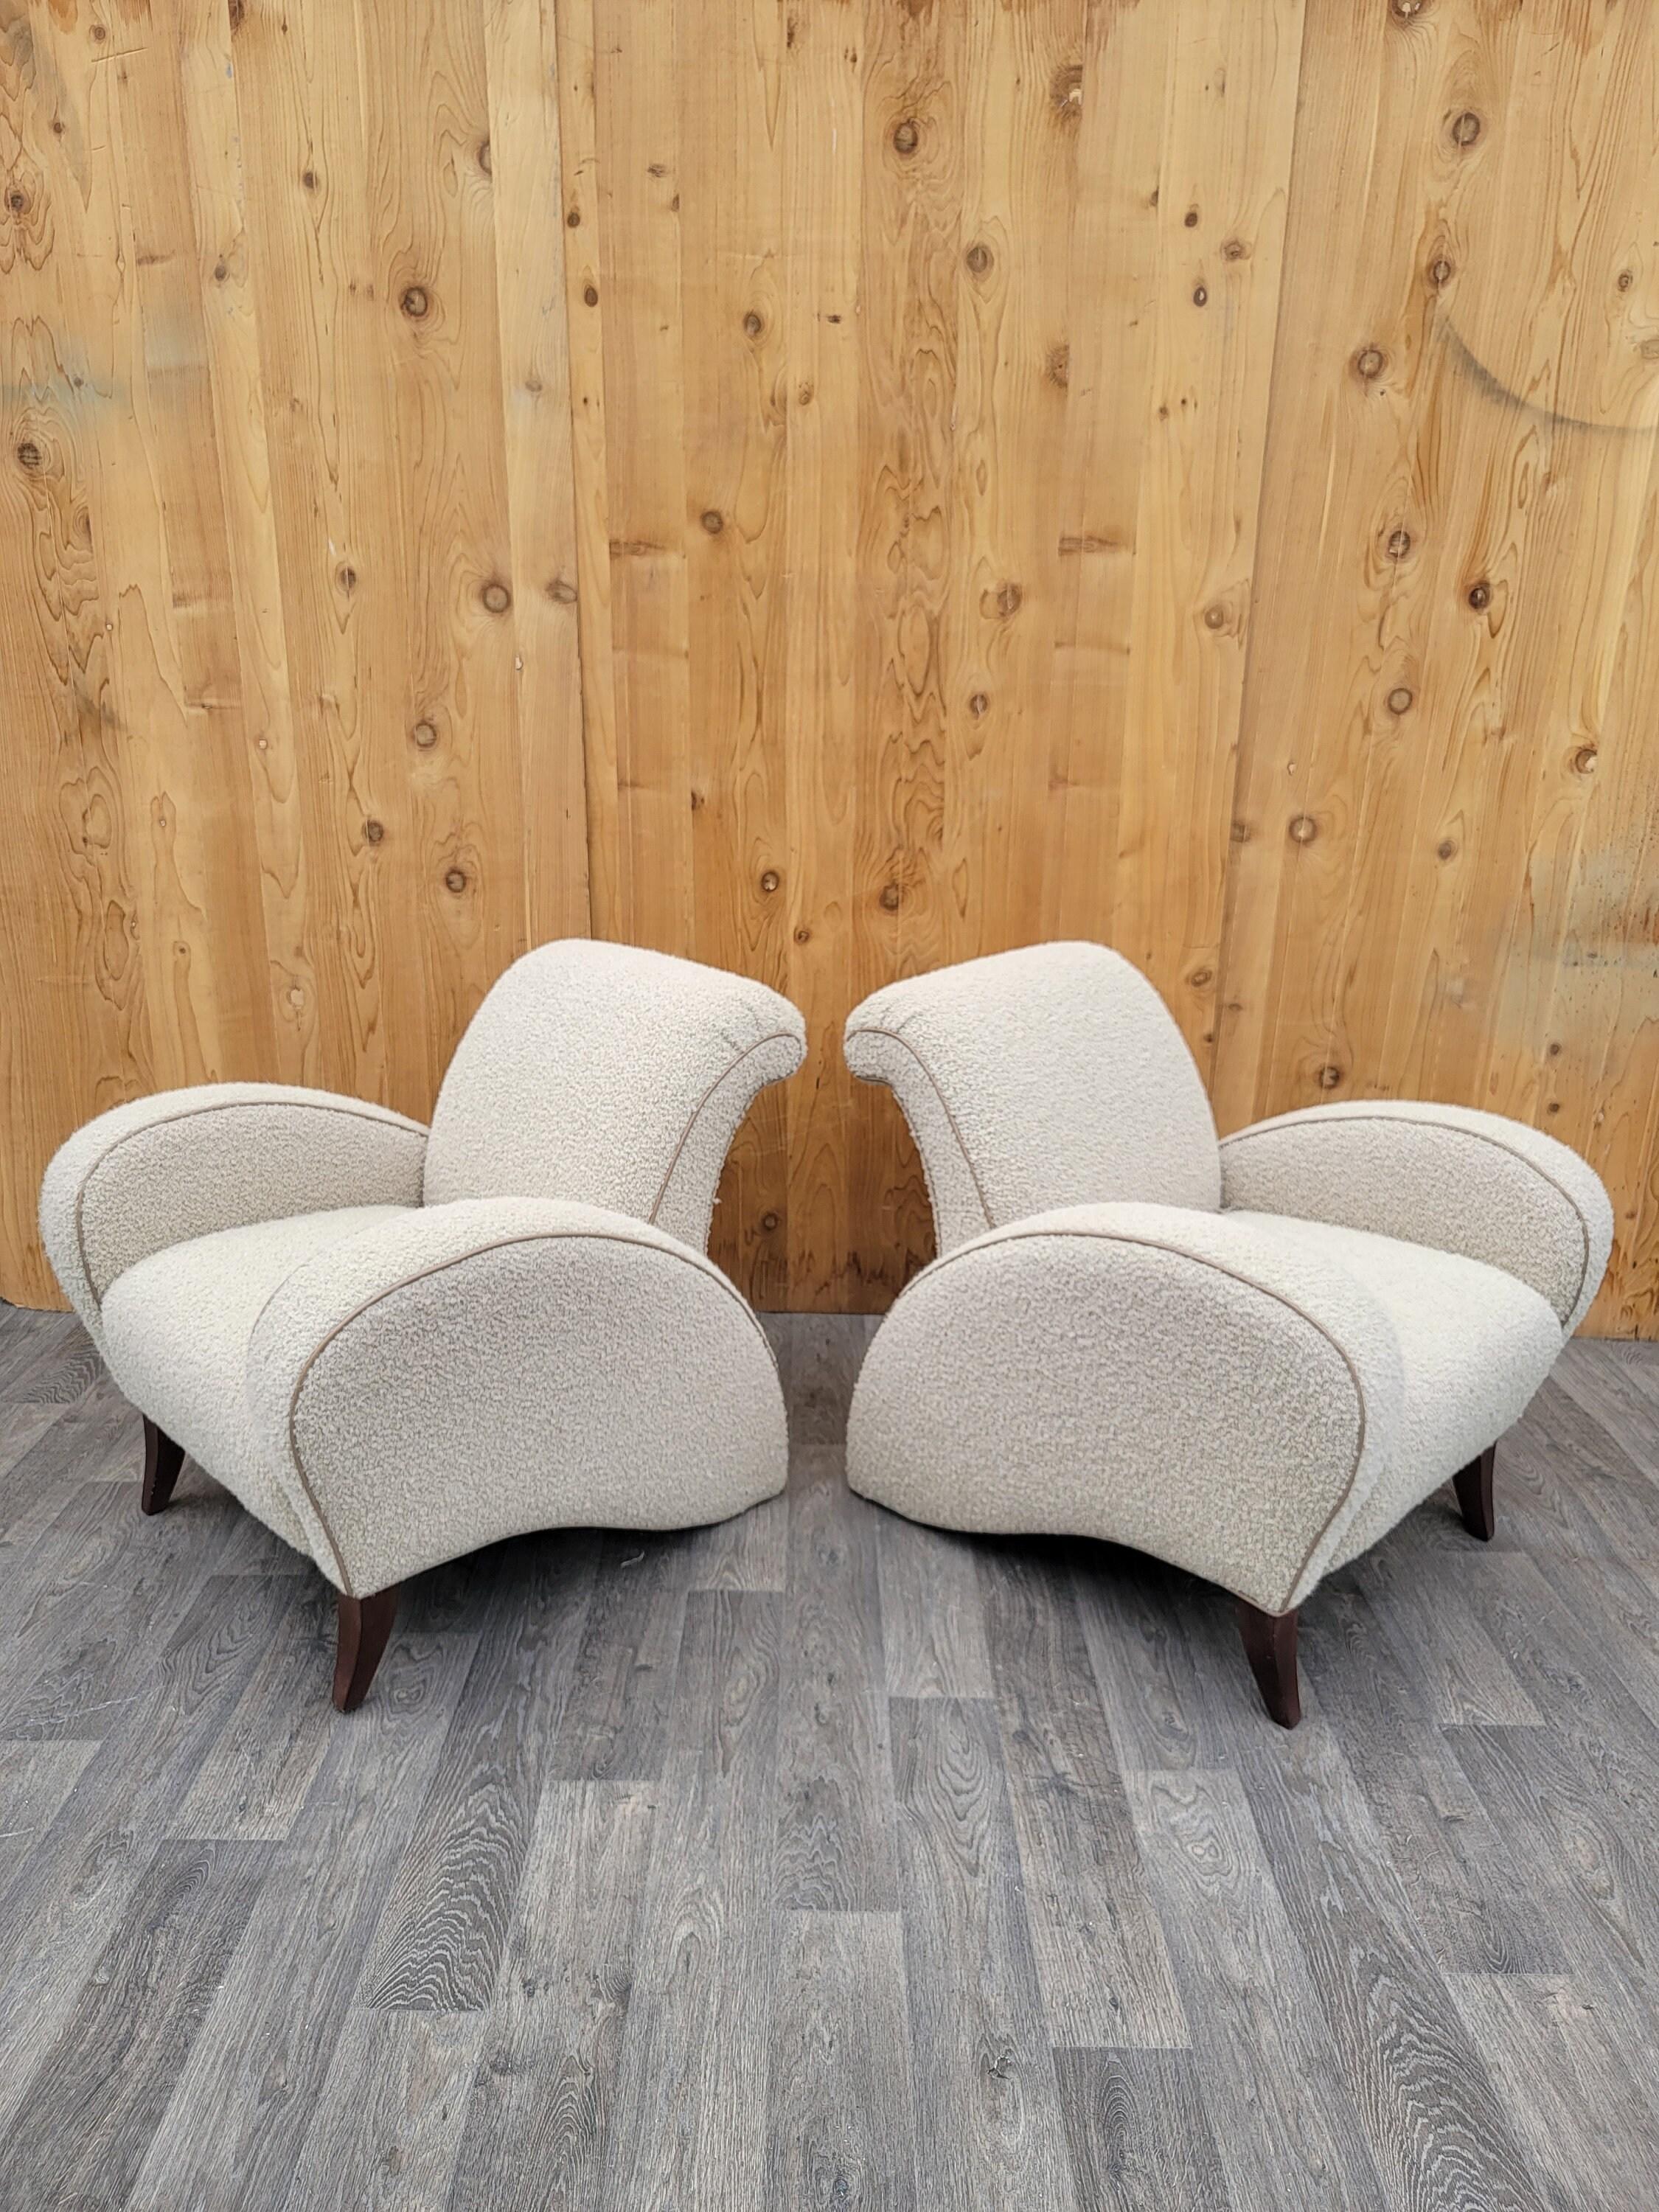 20th Century Italian Art Deco Club Chairs in Wool Boucle with Italian Leather Trim - Pair